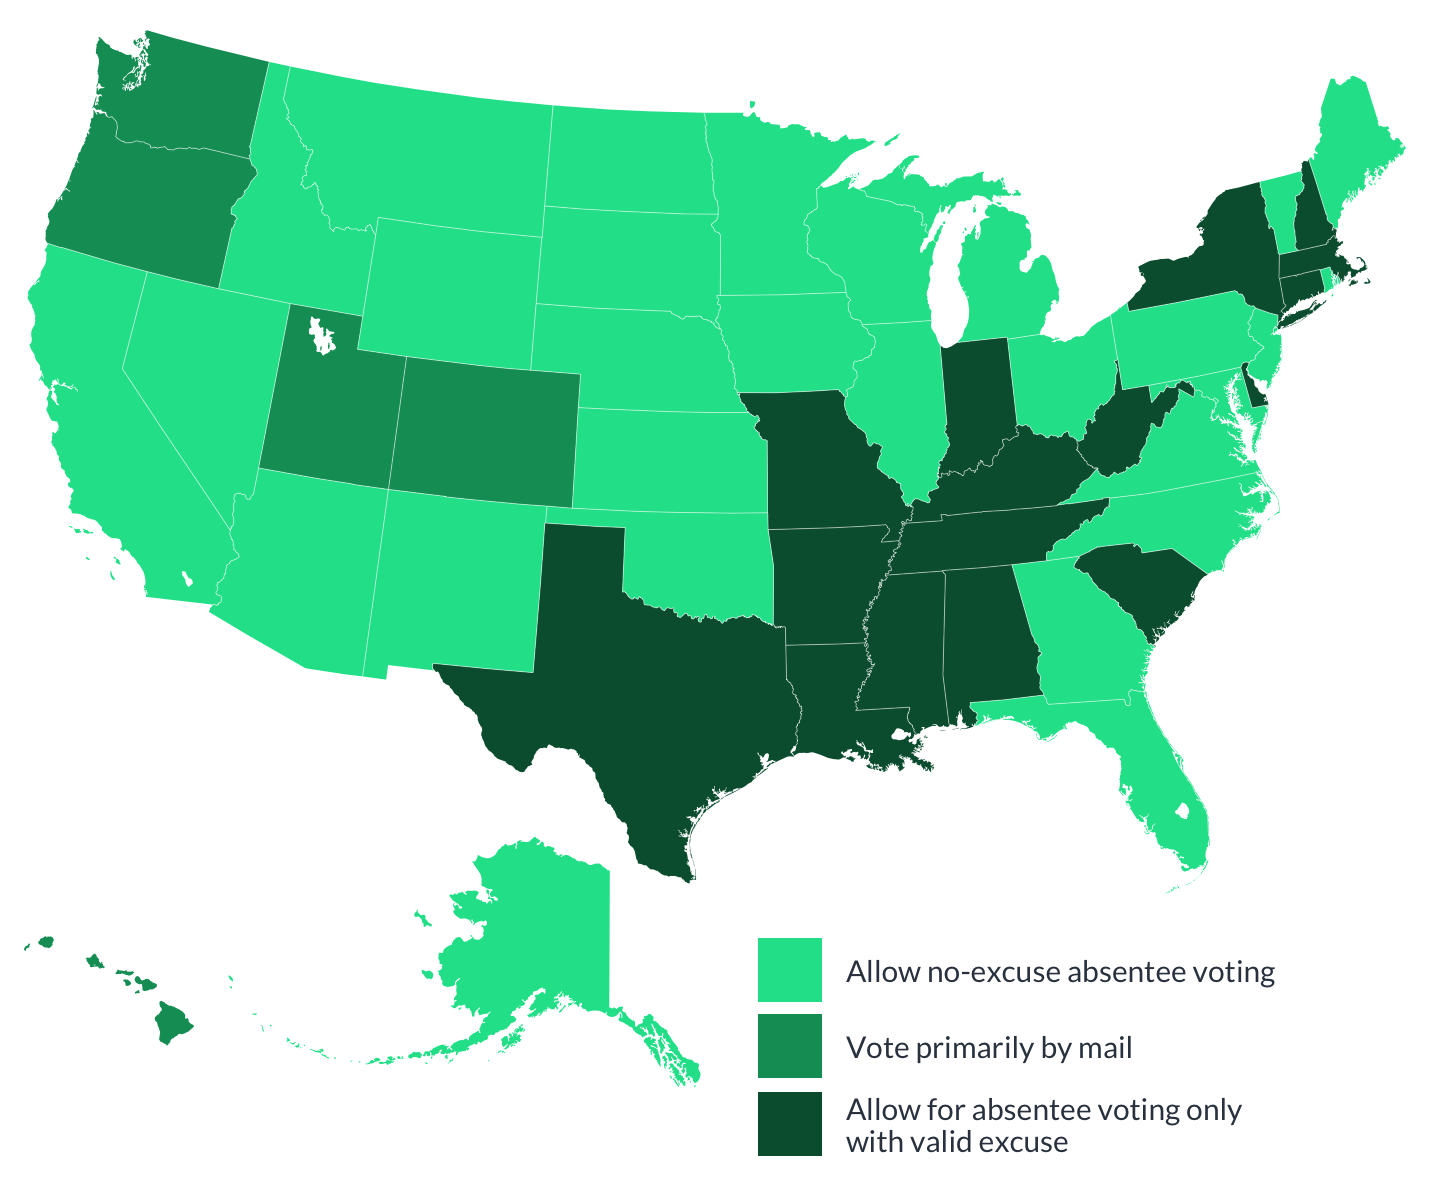 The breakdown of states’ vote-by-mail policies before the pandemic.